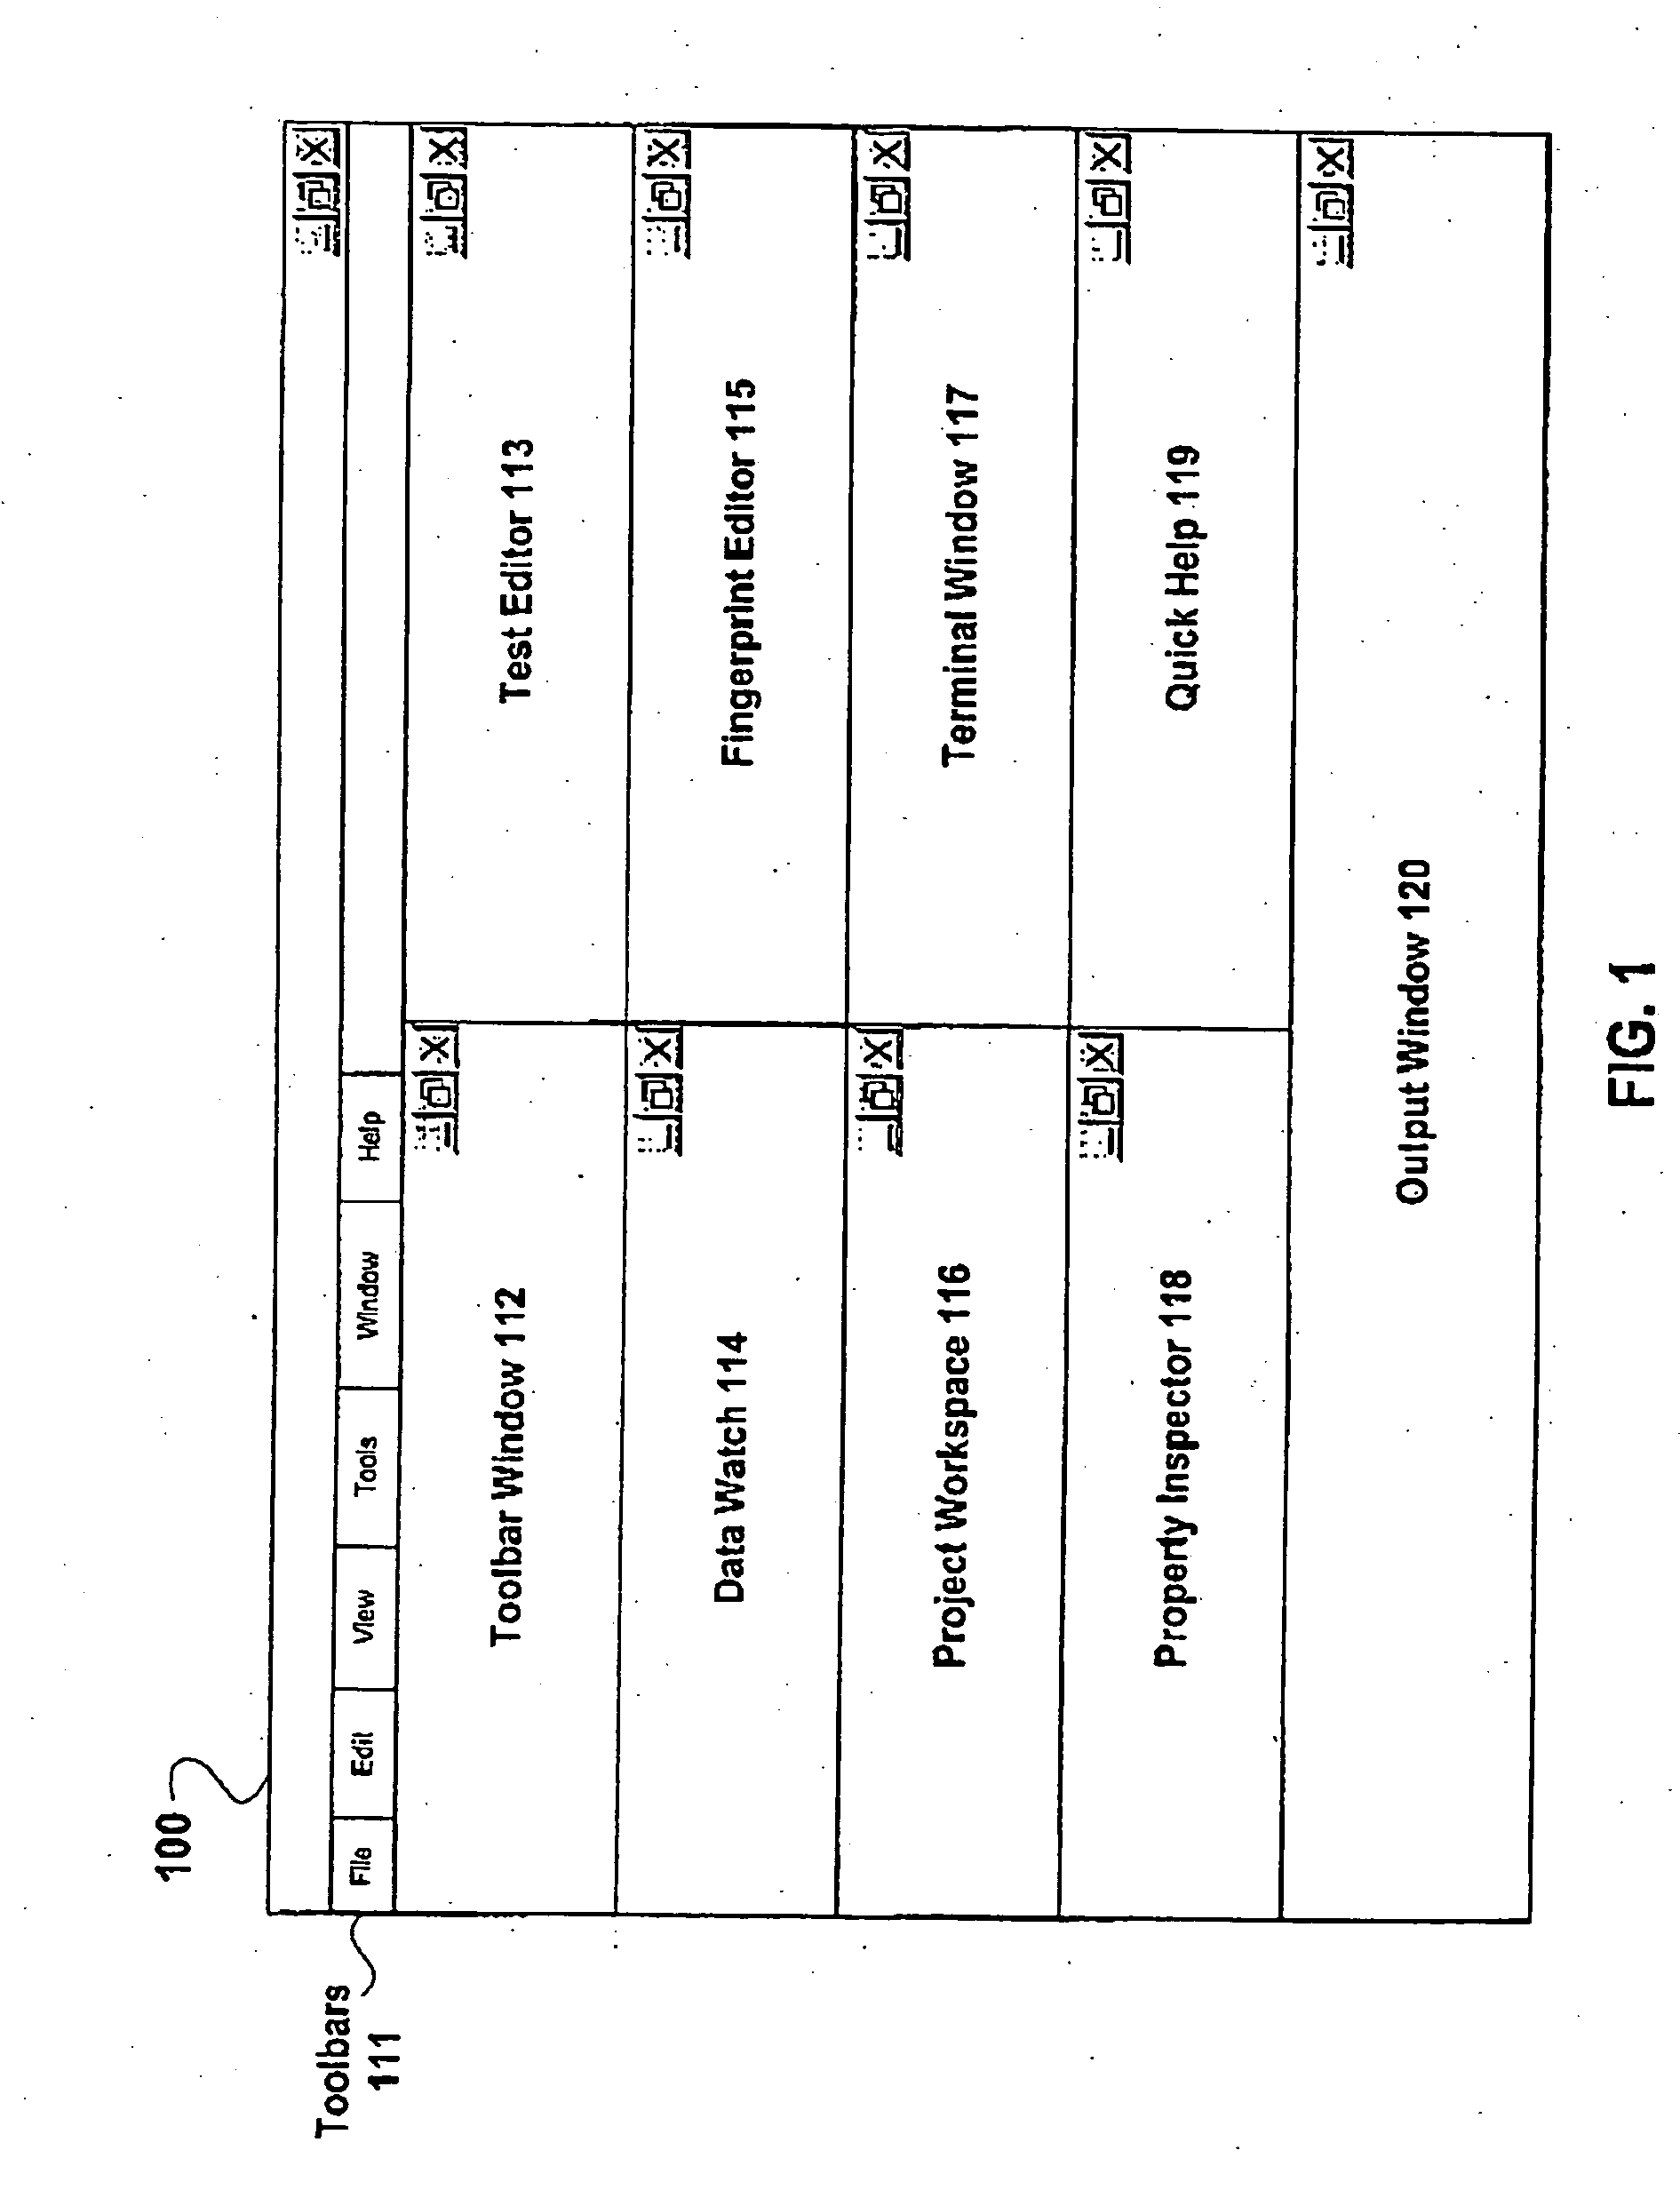 Application integration system and method using intelligent agents for integrating information access over extended networks